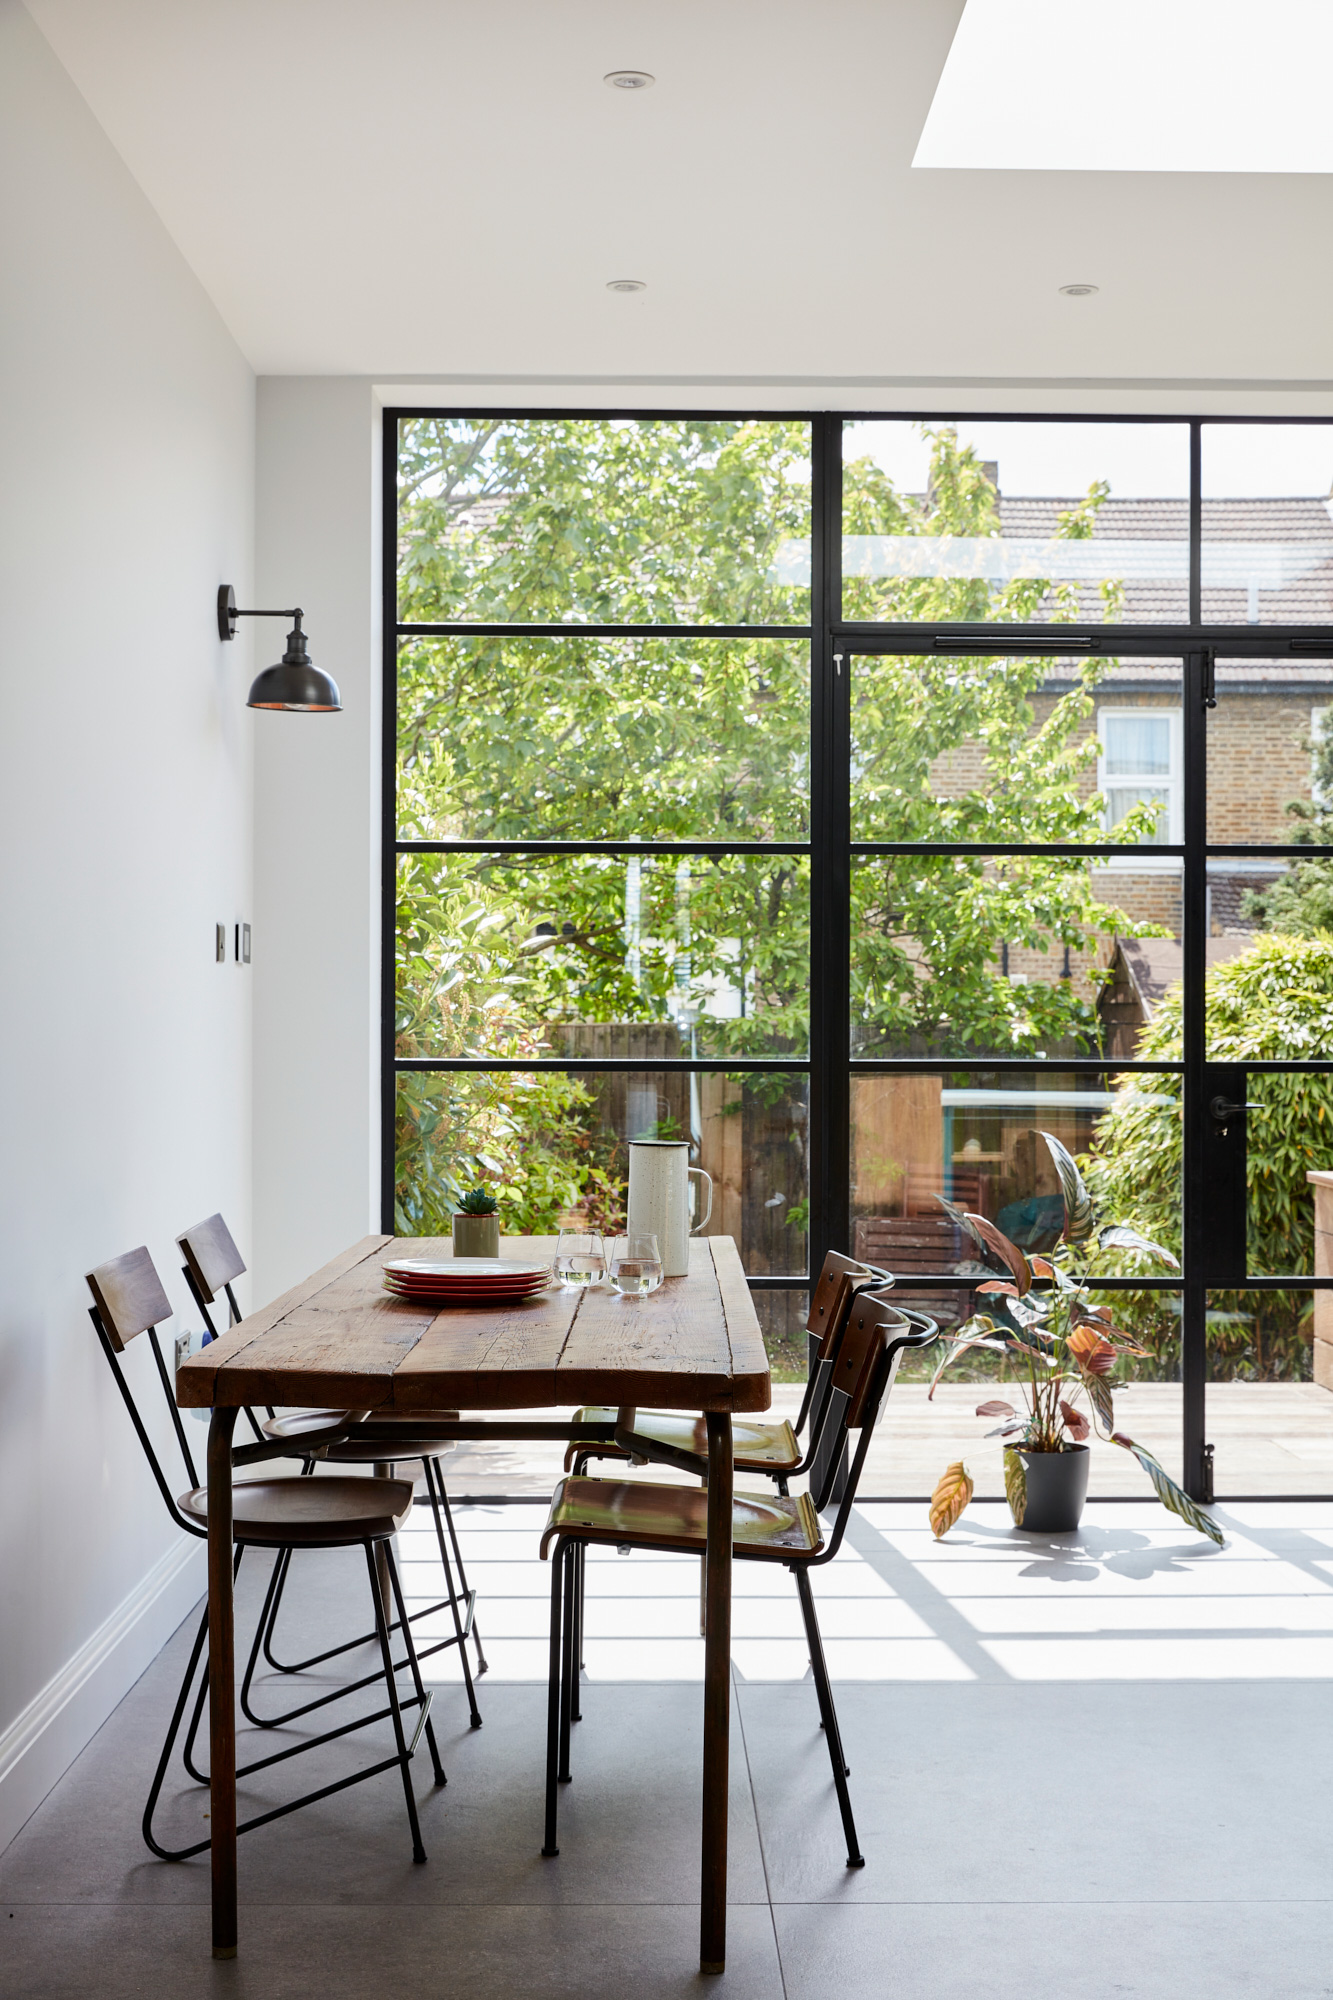 Crittall style doors with reclaimed oak kitchen table